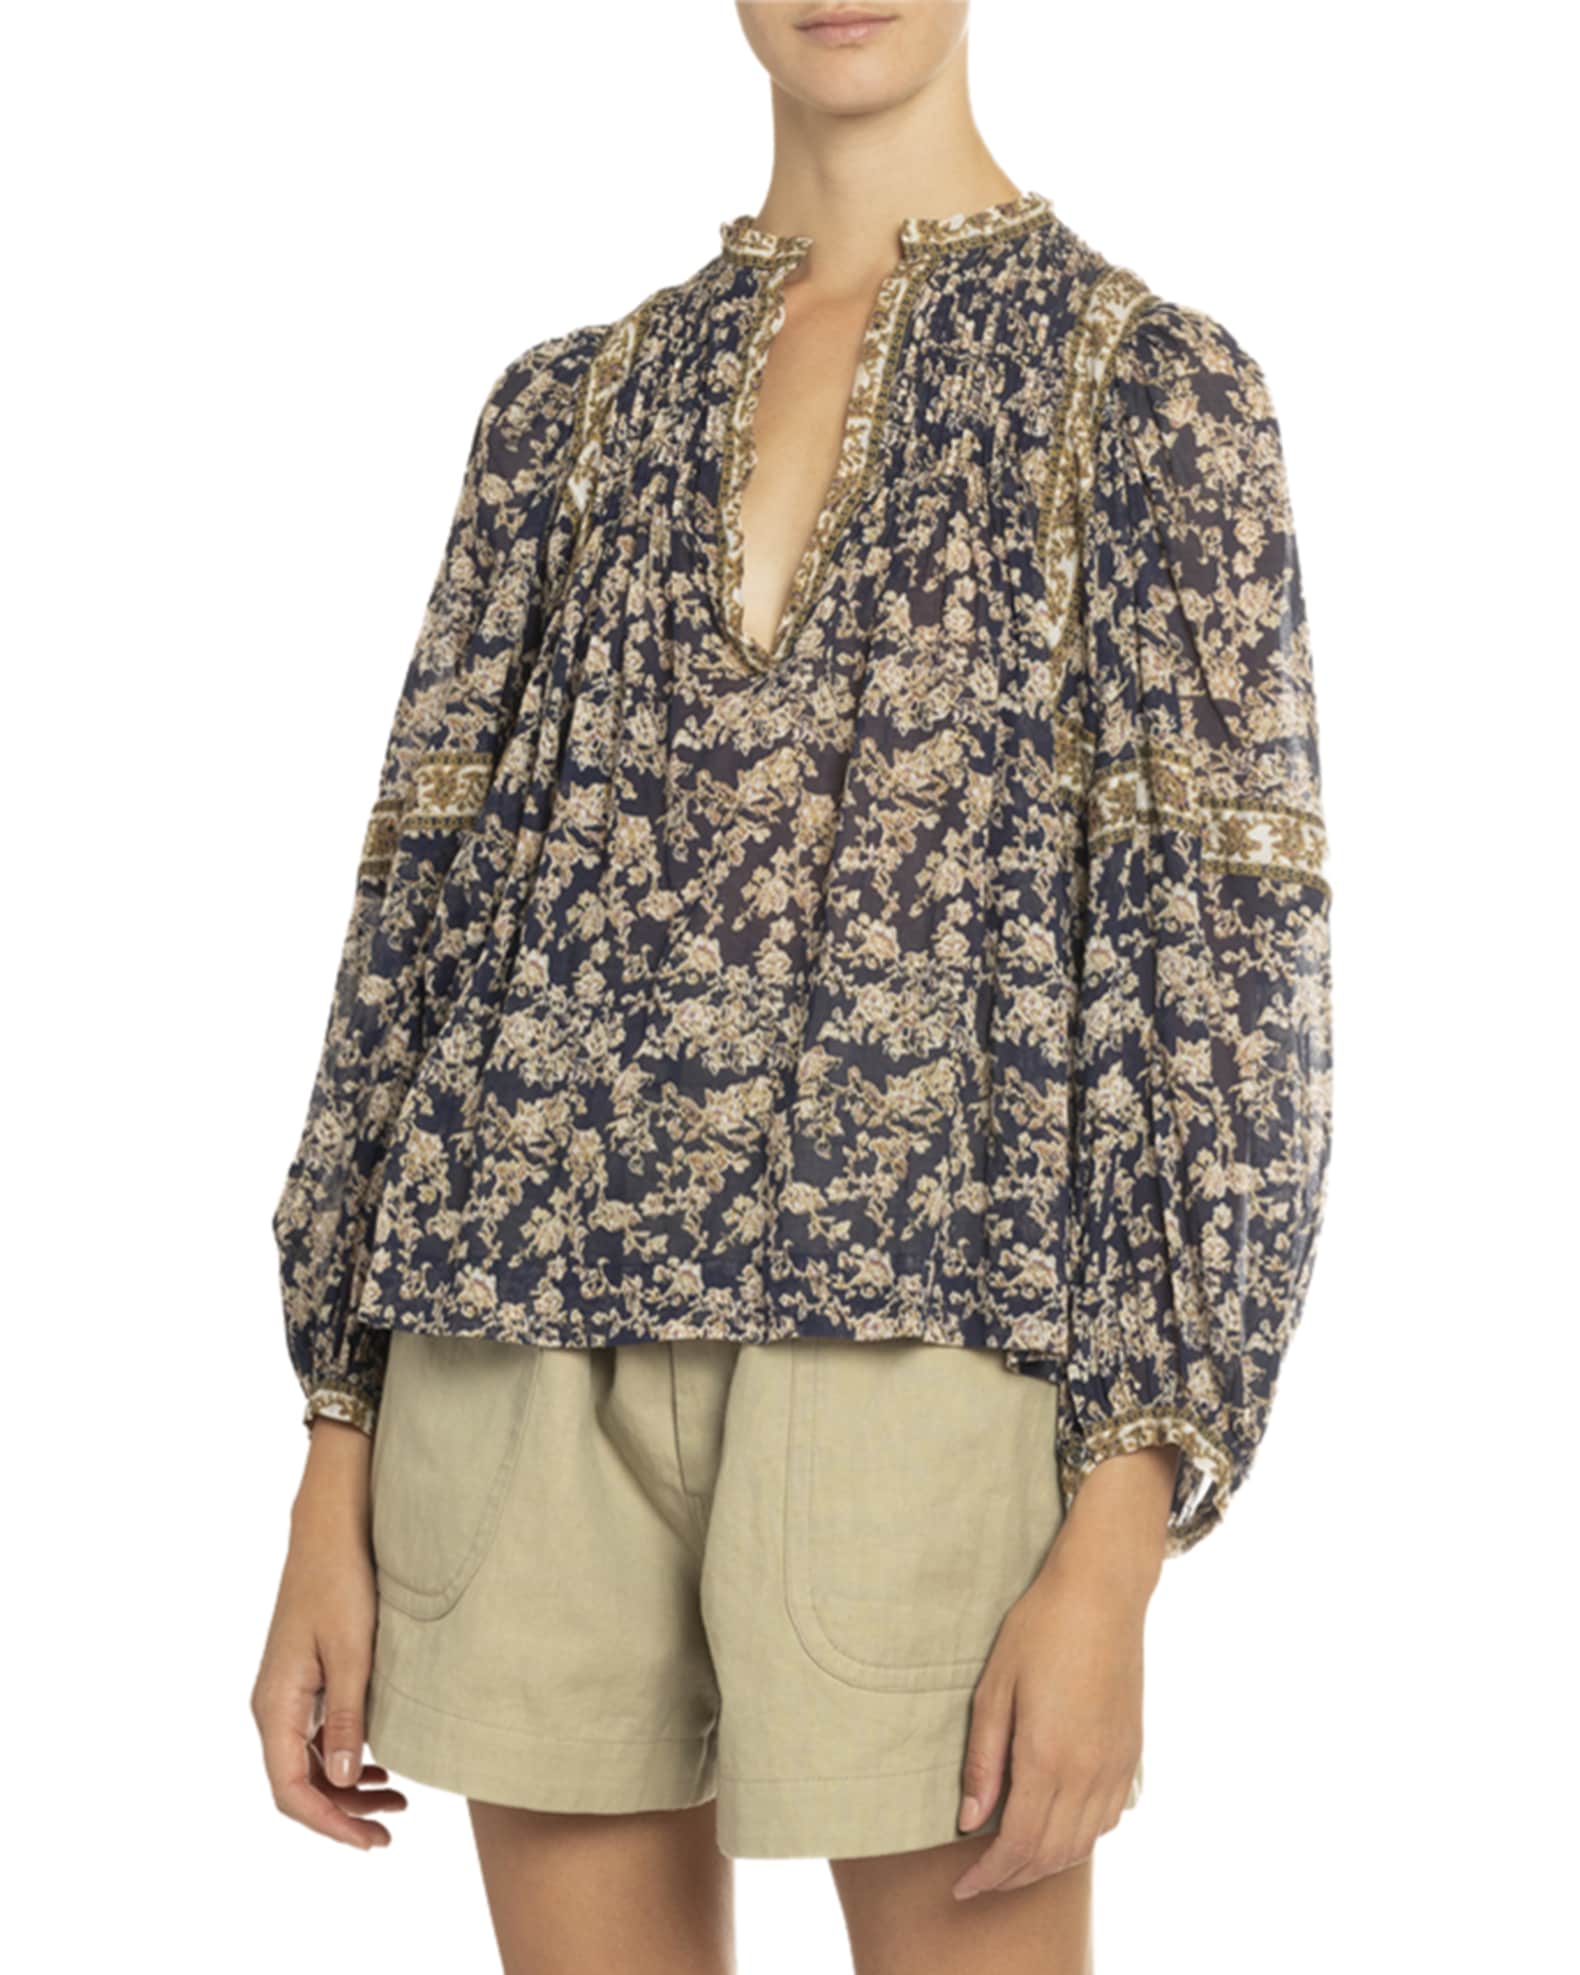 Violette Printed Long-Sleeve Top and Matching Items | Neiman Marcus